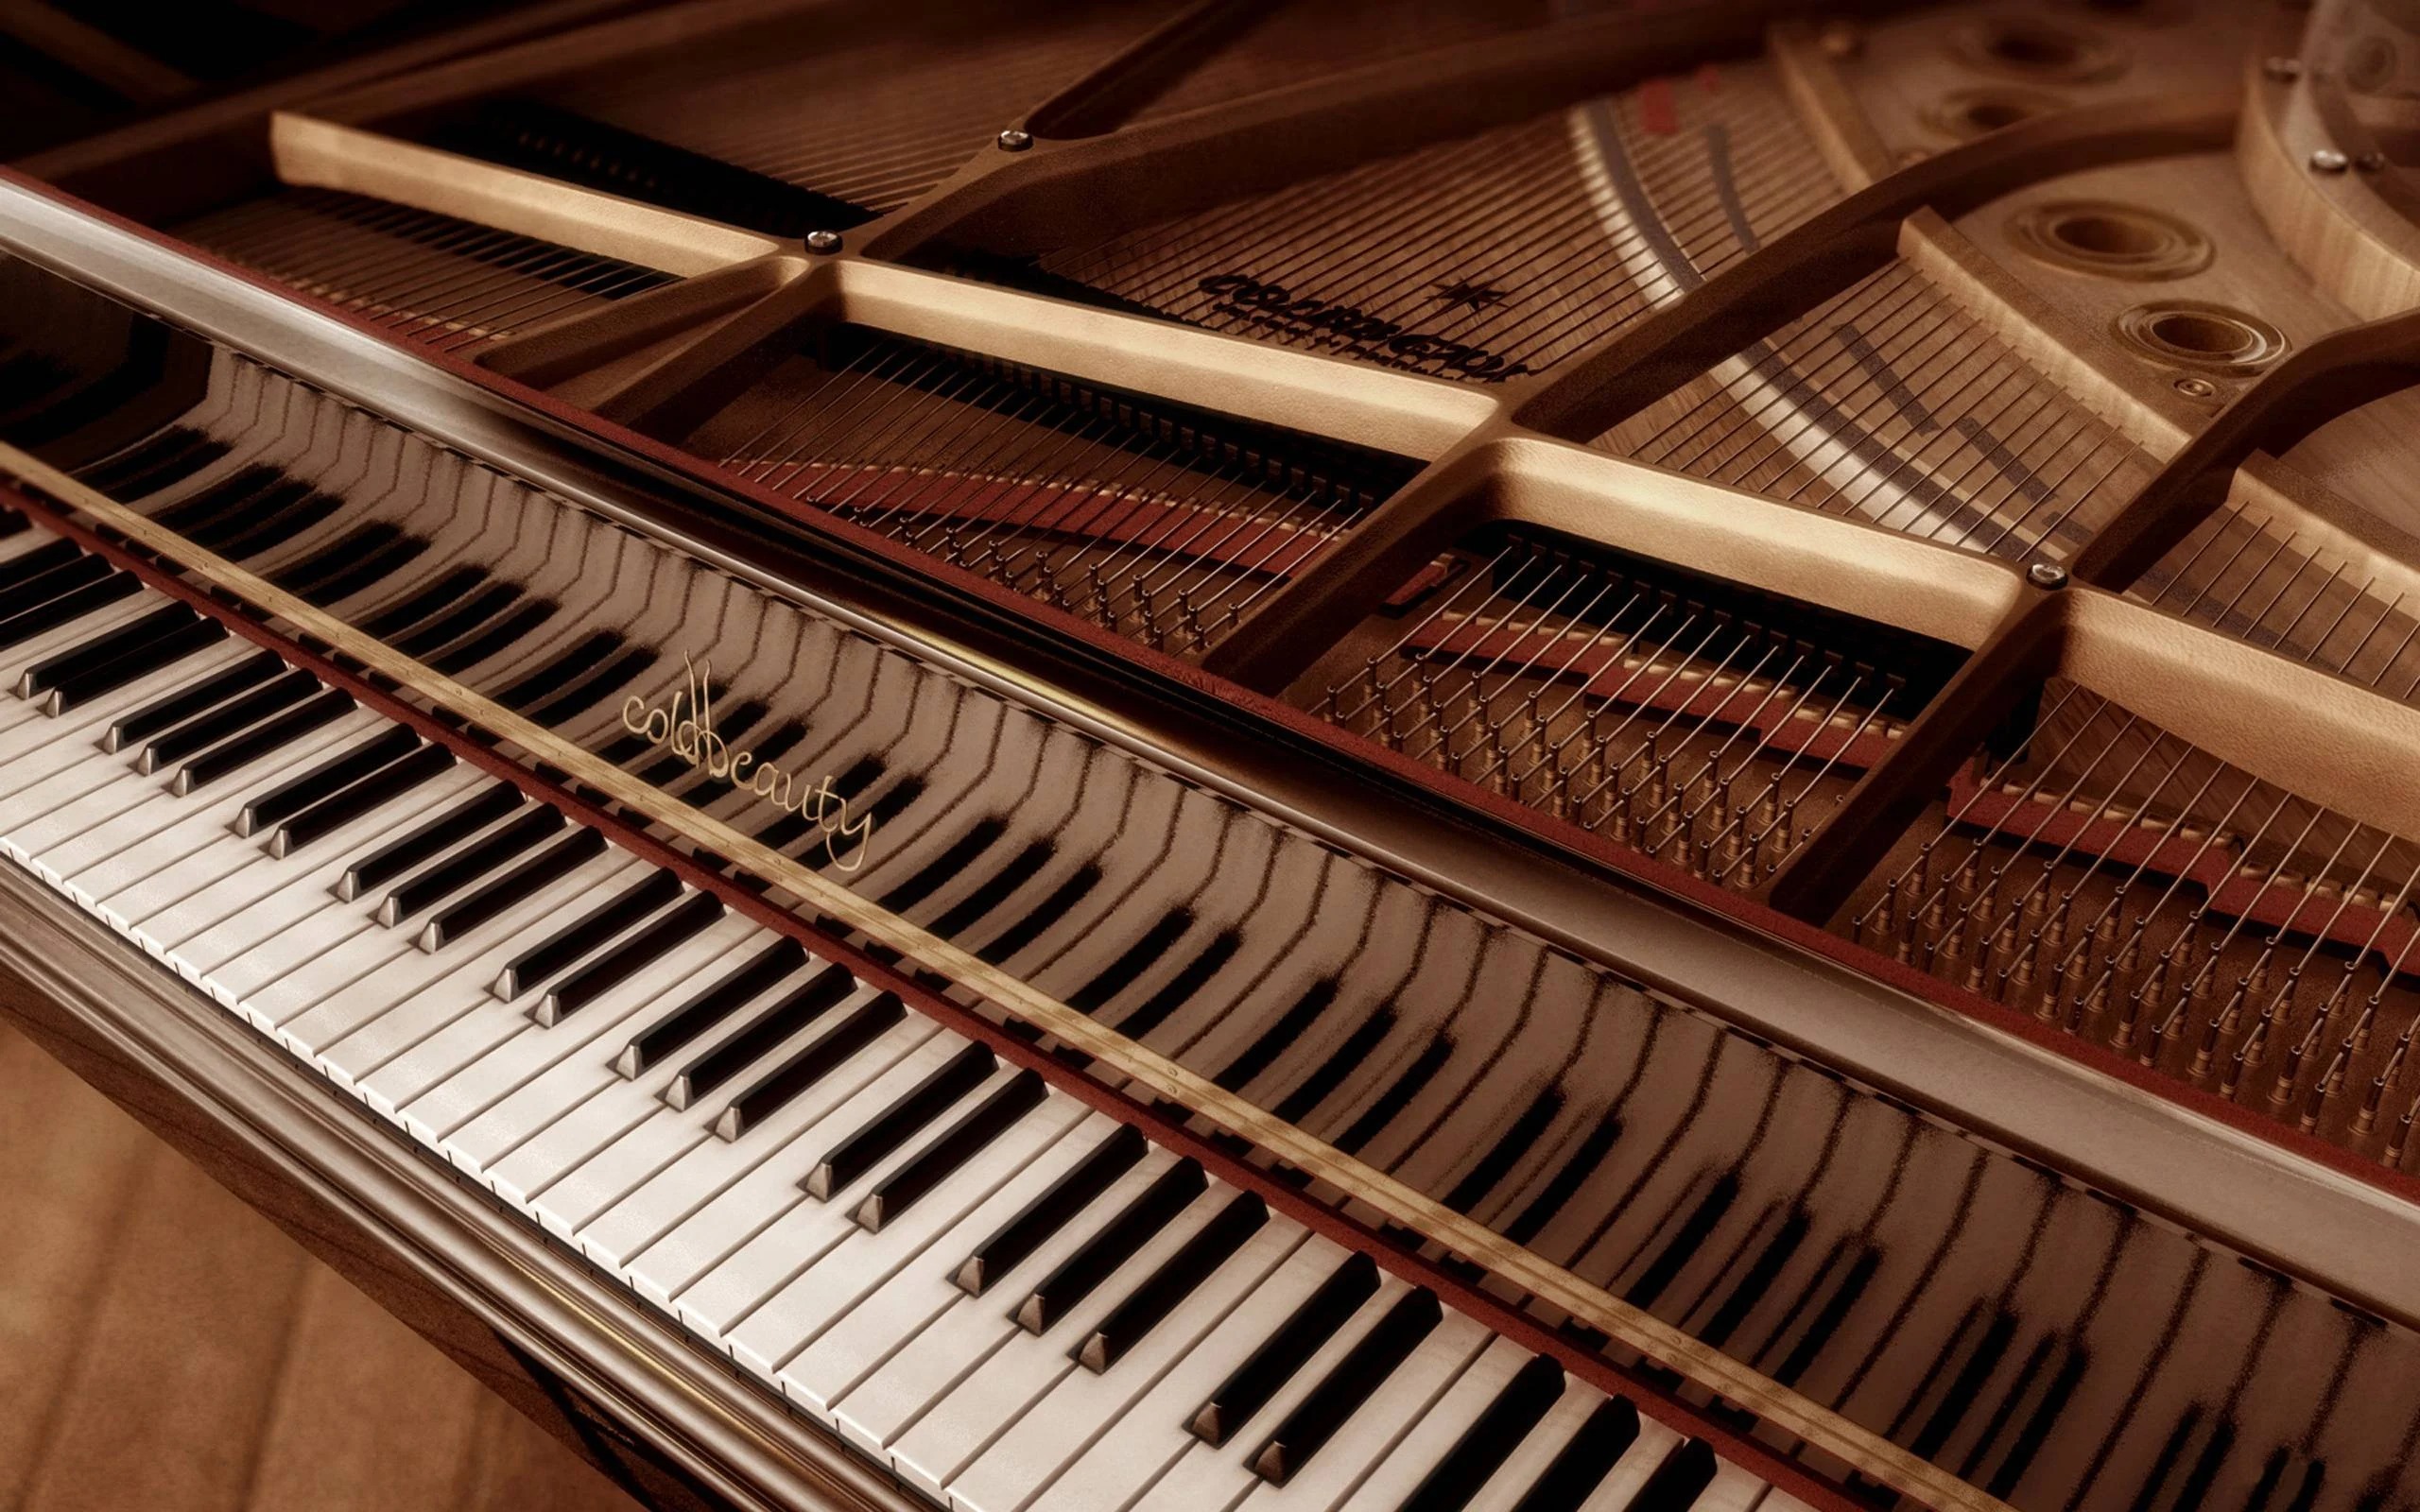 Most Expansive Piano in the World